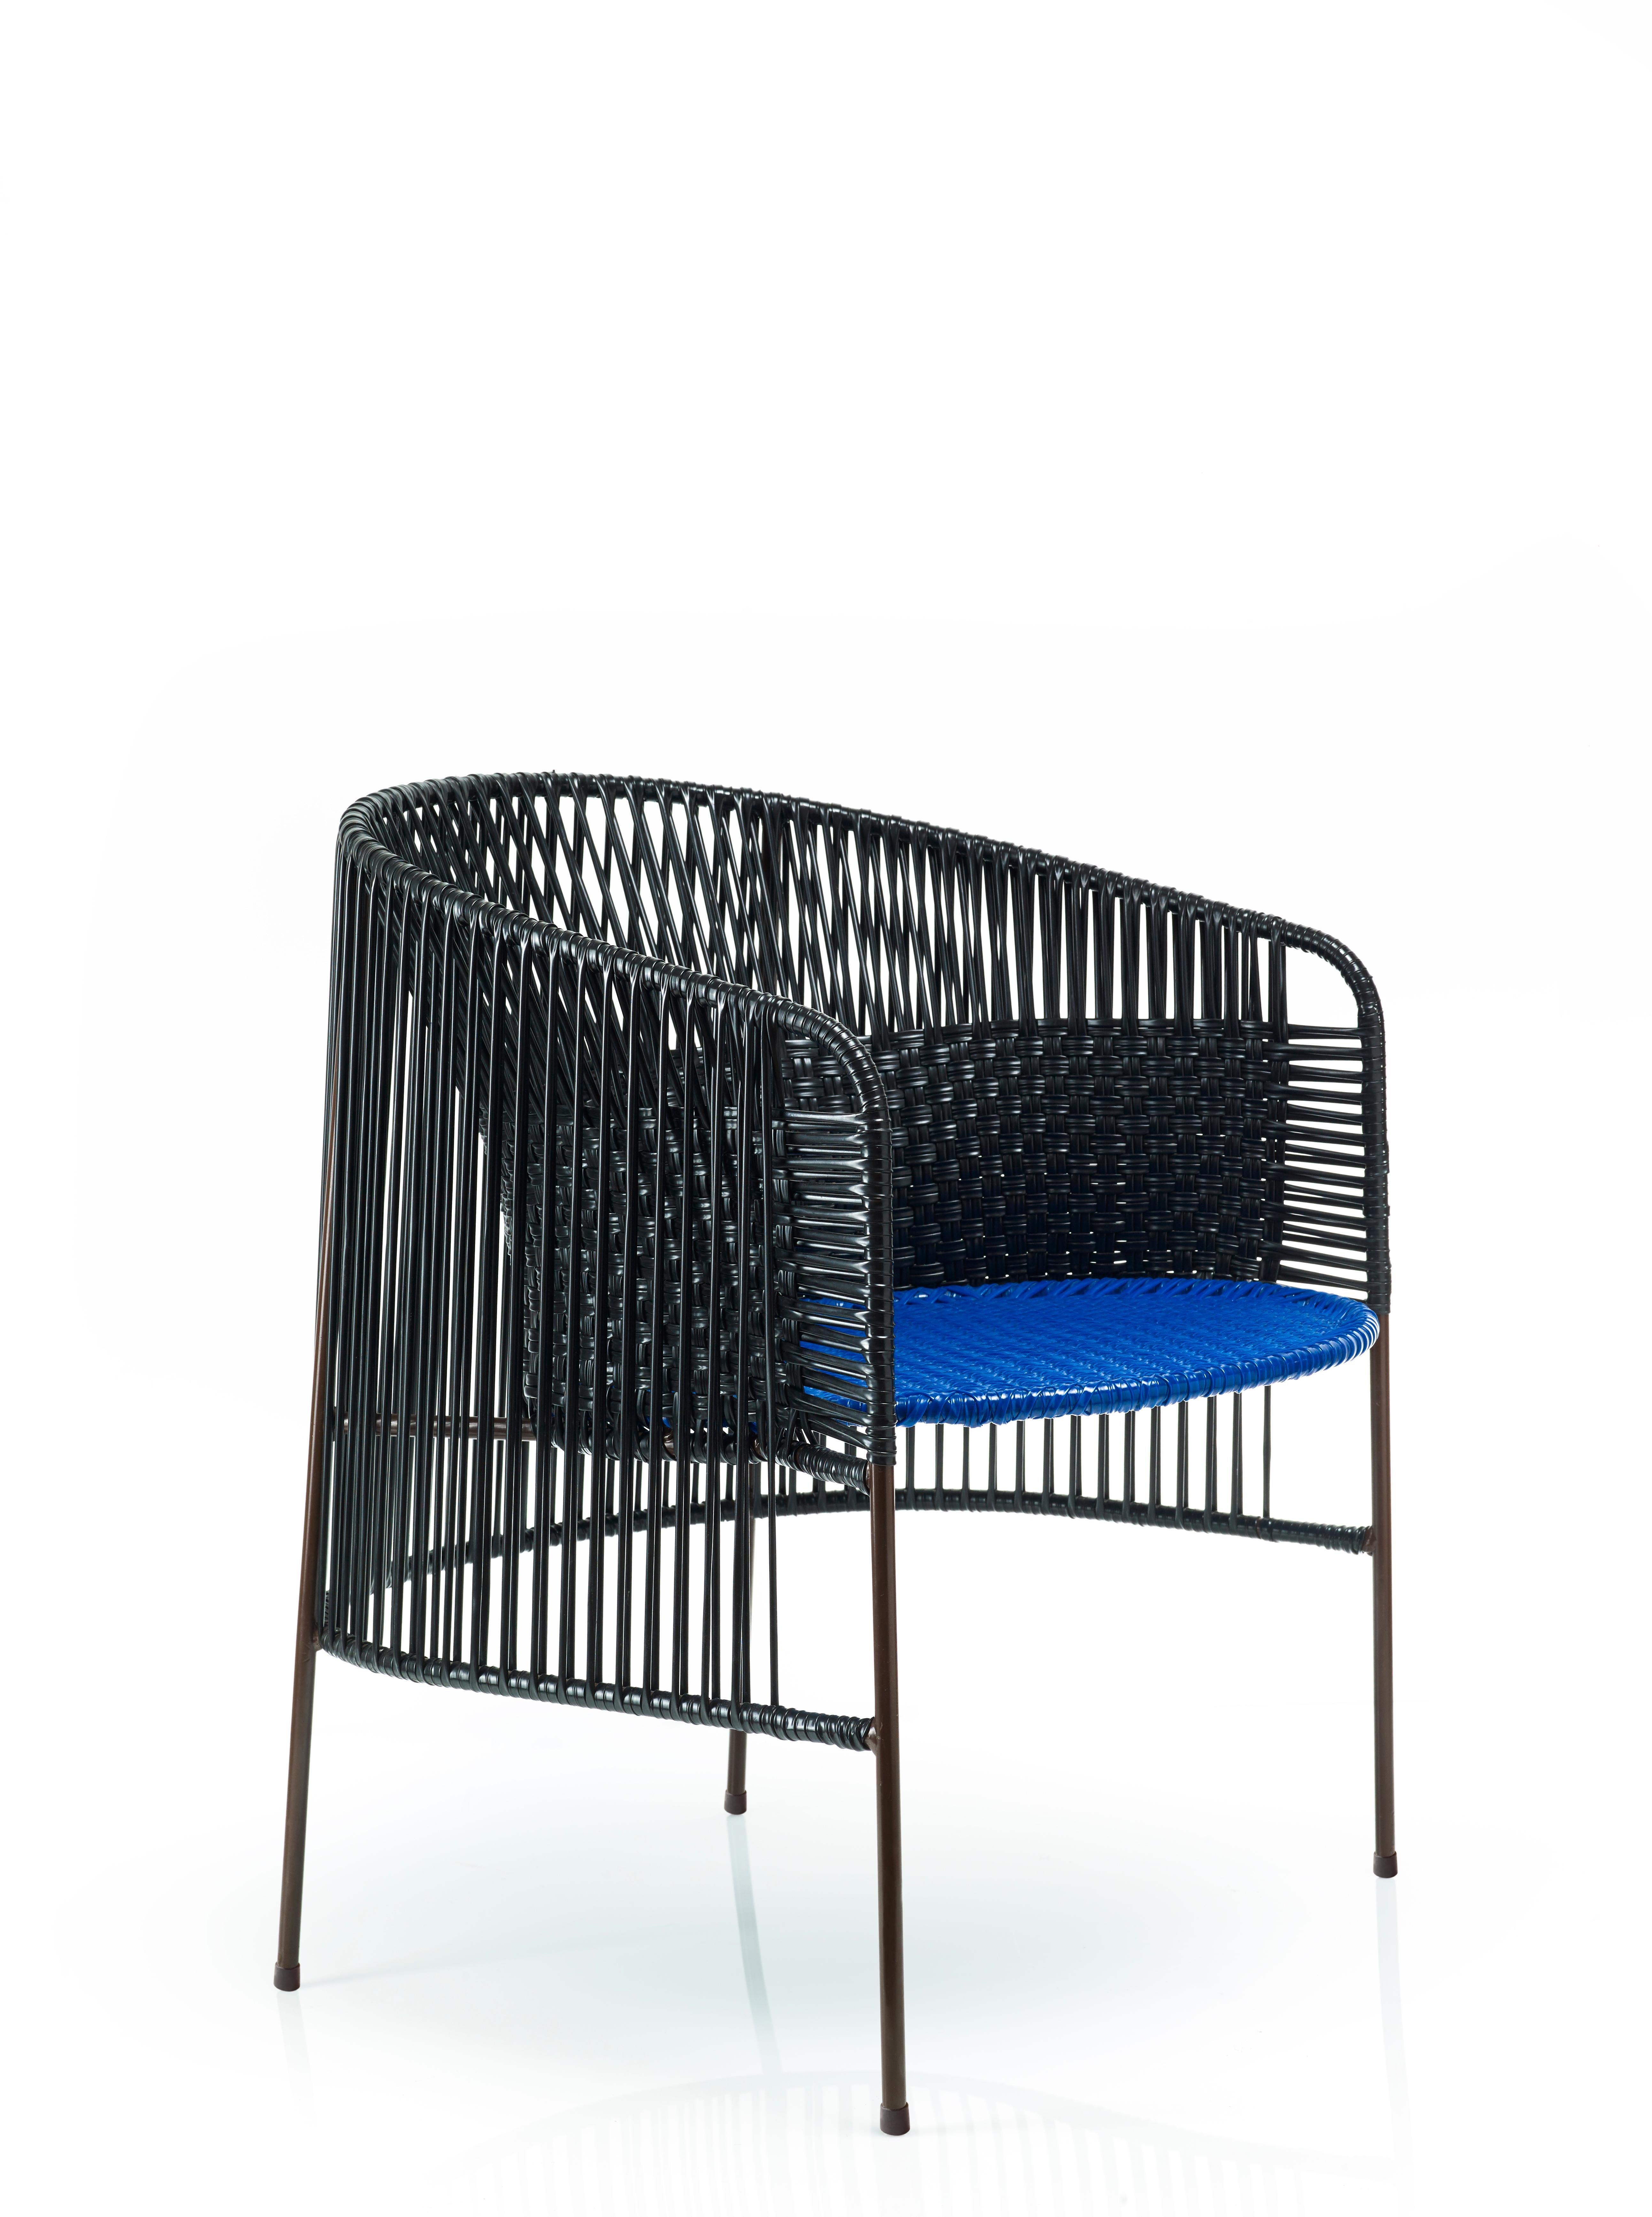 Black Caribe lounge chair by Sebastian Herkner
Materials: Galvanized and powder-coated tubular steel. PVC strings are made from recycled plastic.
Technique: Made from recycled plastic and weaved by local craftspeople in Colombia. 
Dimensions: W